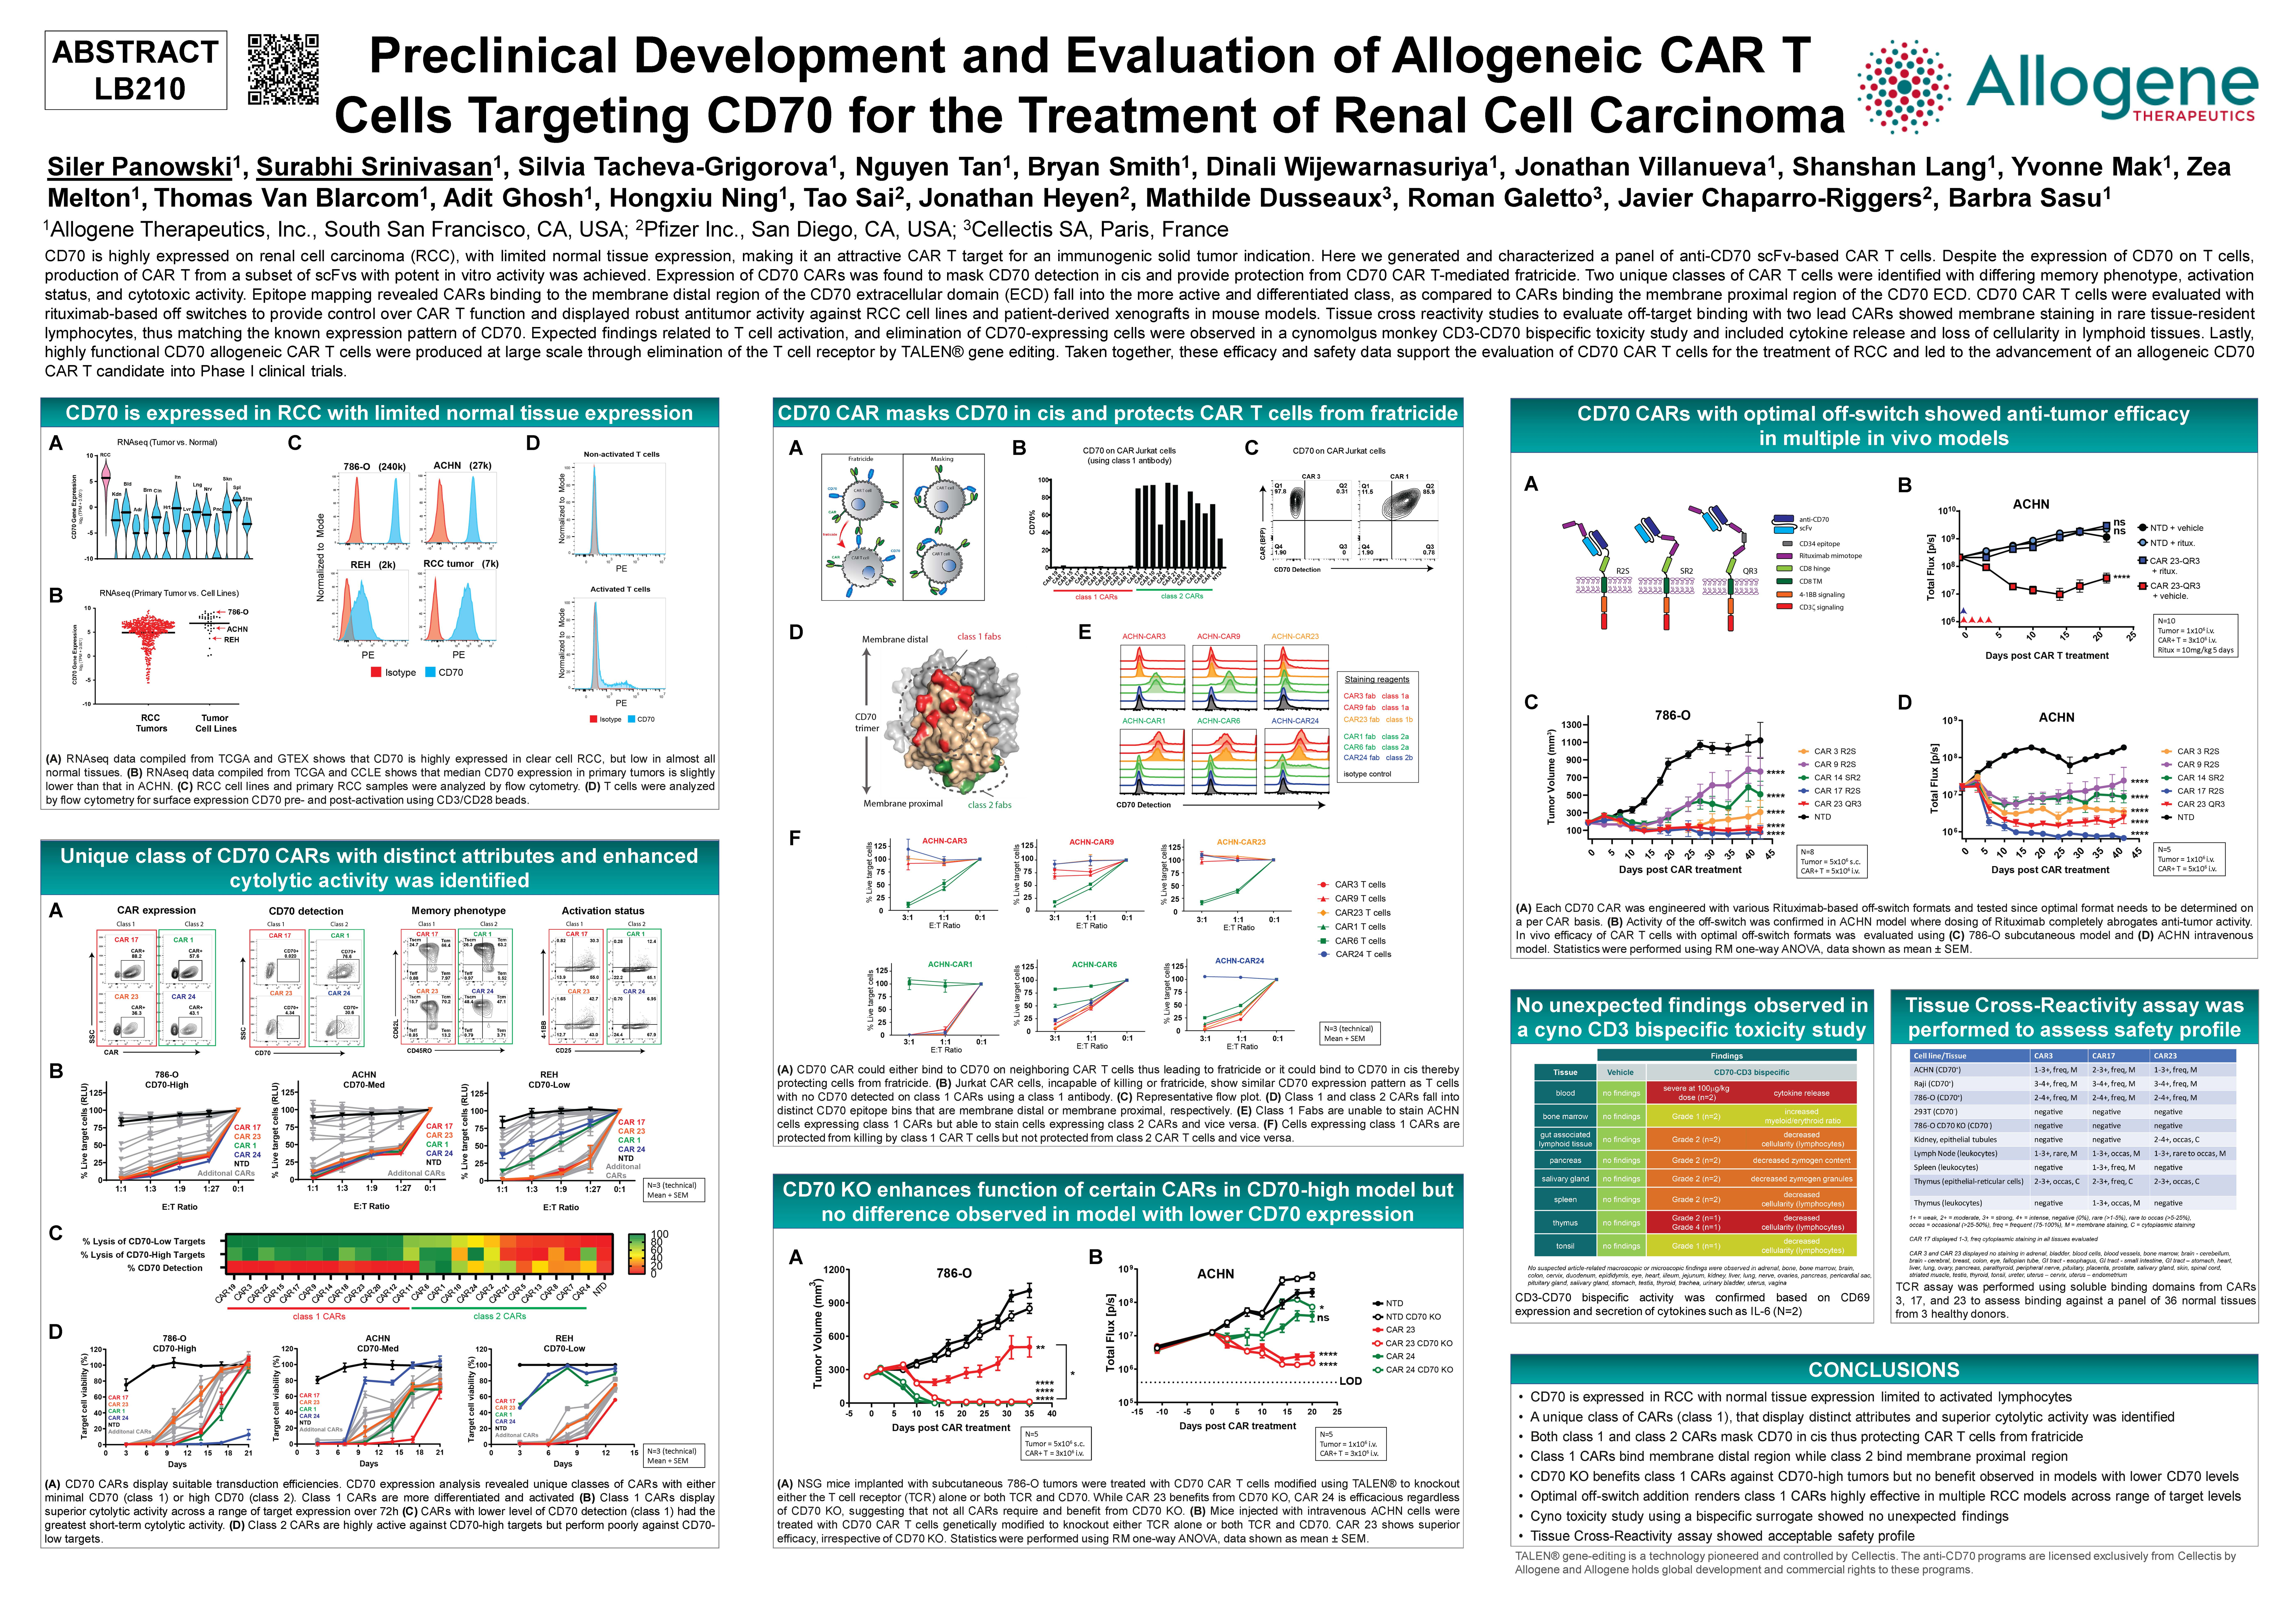 Preclinical Development and Evaluation of Allogeneic CAR T Cells Targeting CD70 for the Treatment of Renal Cell Carcinoma_Poster